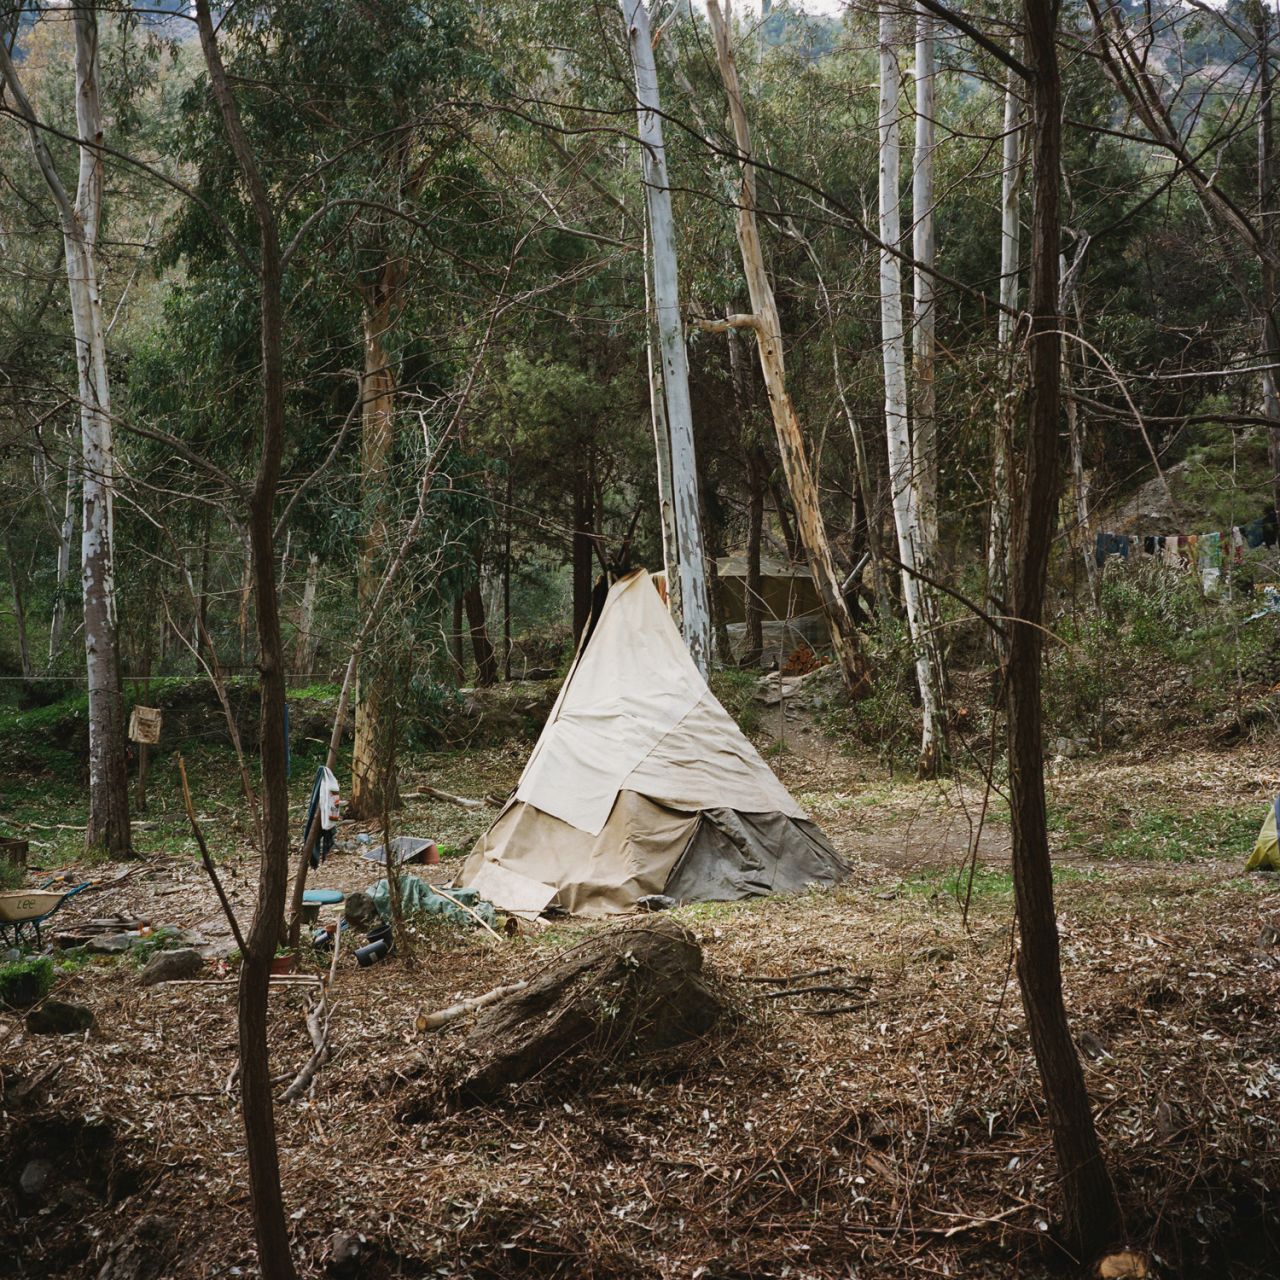  Others opted for the simpler dwelling of a teepee.